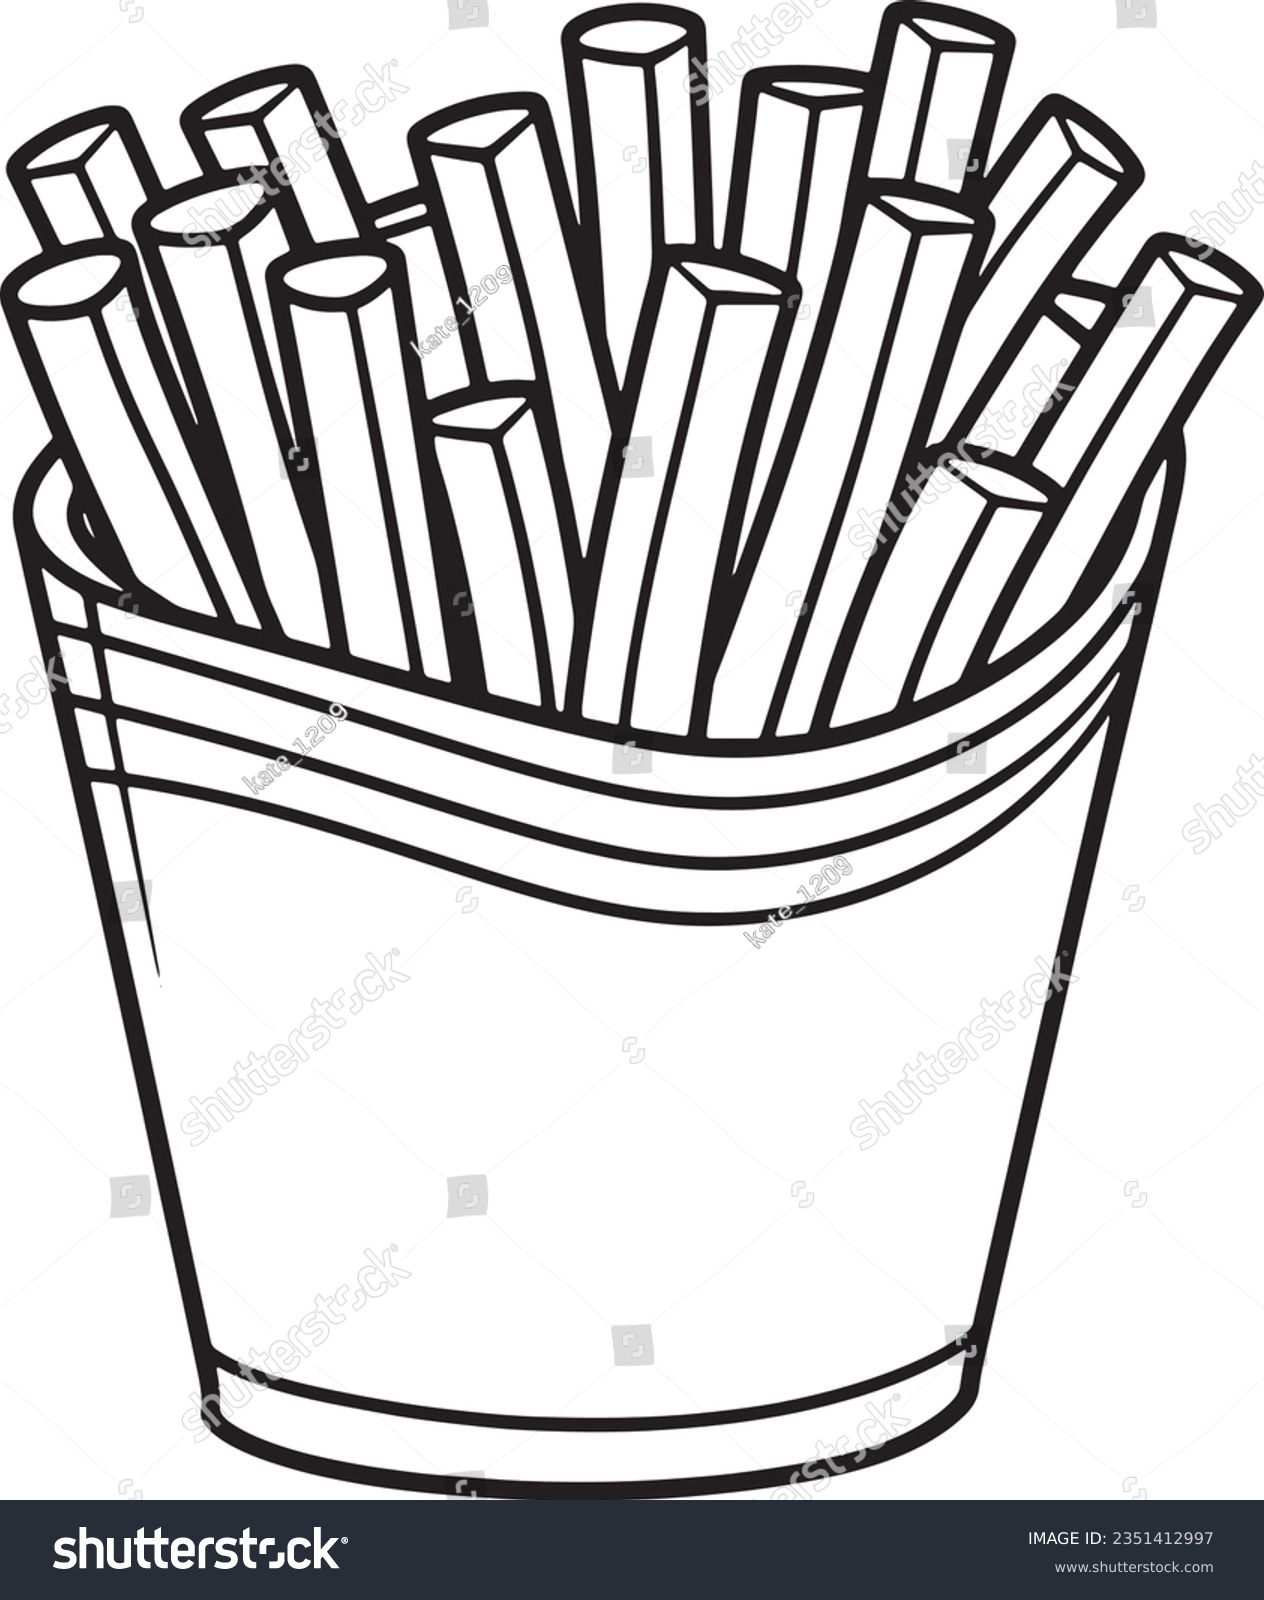 SVG of French fries engraving style, Basic simple Minimalist vector SVG logo graphic, isolated on white background, children's coloring page, outline art, thick crisp lines, black and whi svg